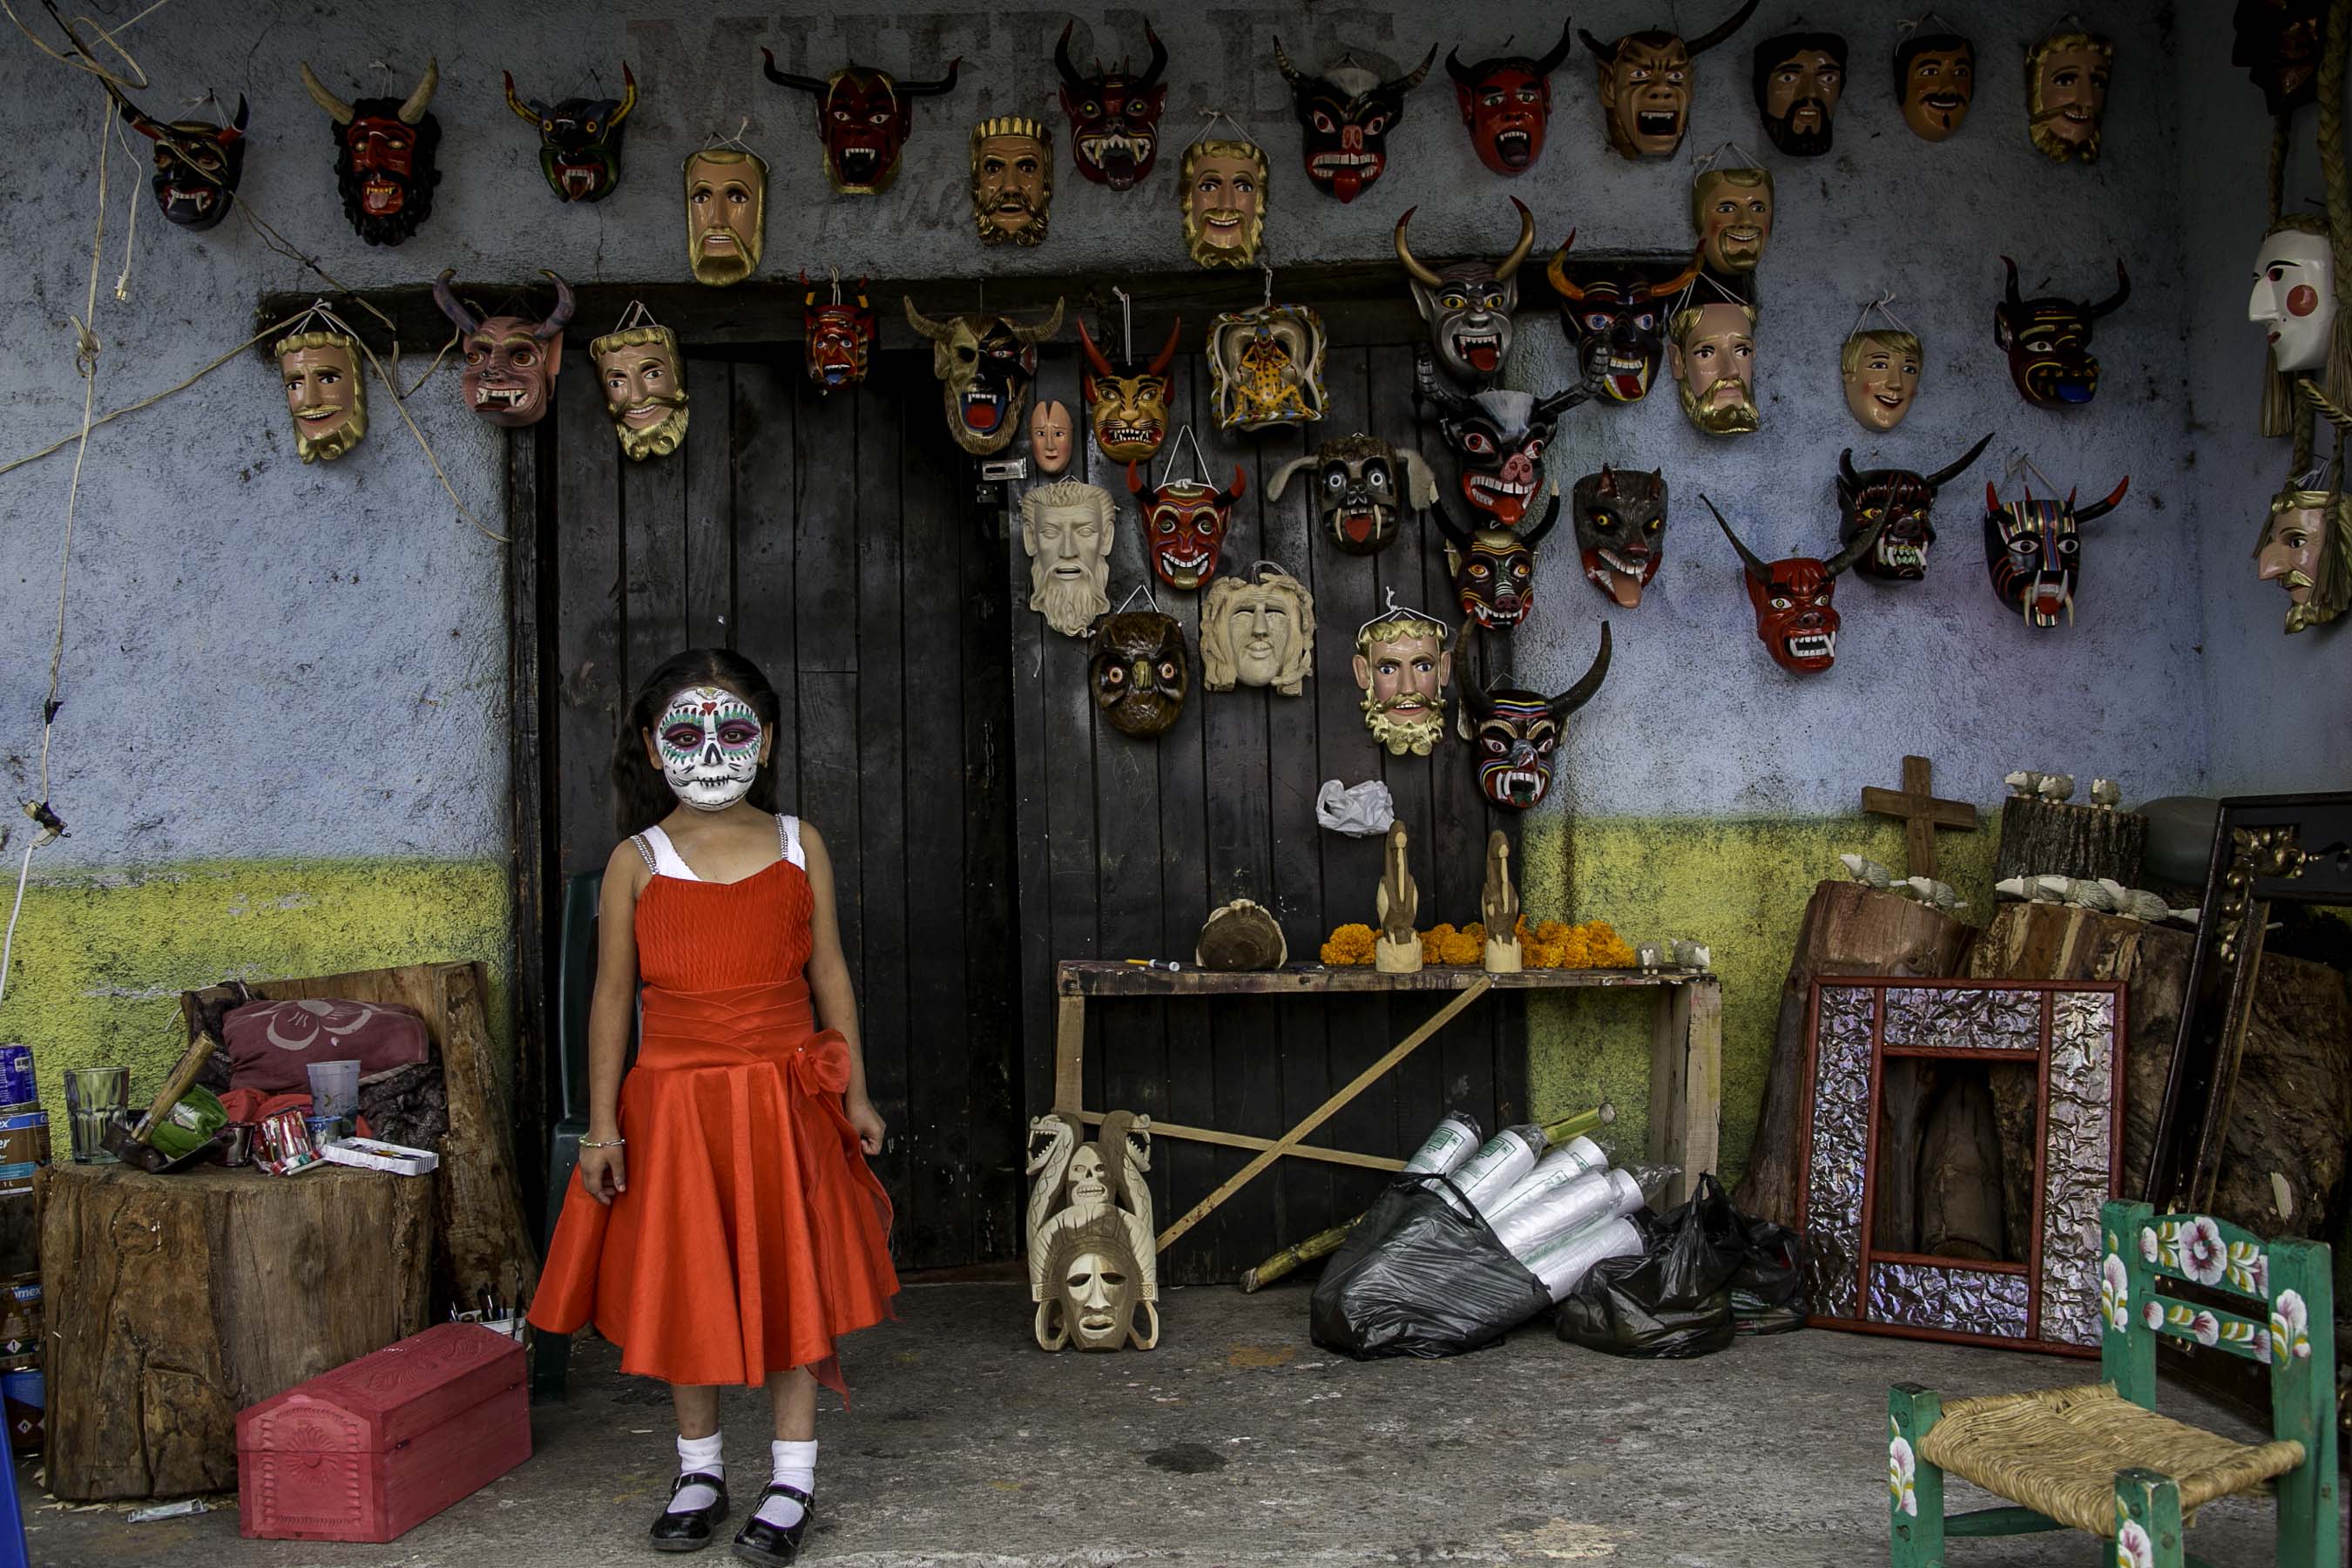 A young girl in Erongaricuaro has just prepared her mask for the celebrations. This particular small town along Lake Patzcuaro is know for its carved wooden masks. From infants to aged adults, family joy is the essence of the tradition.